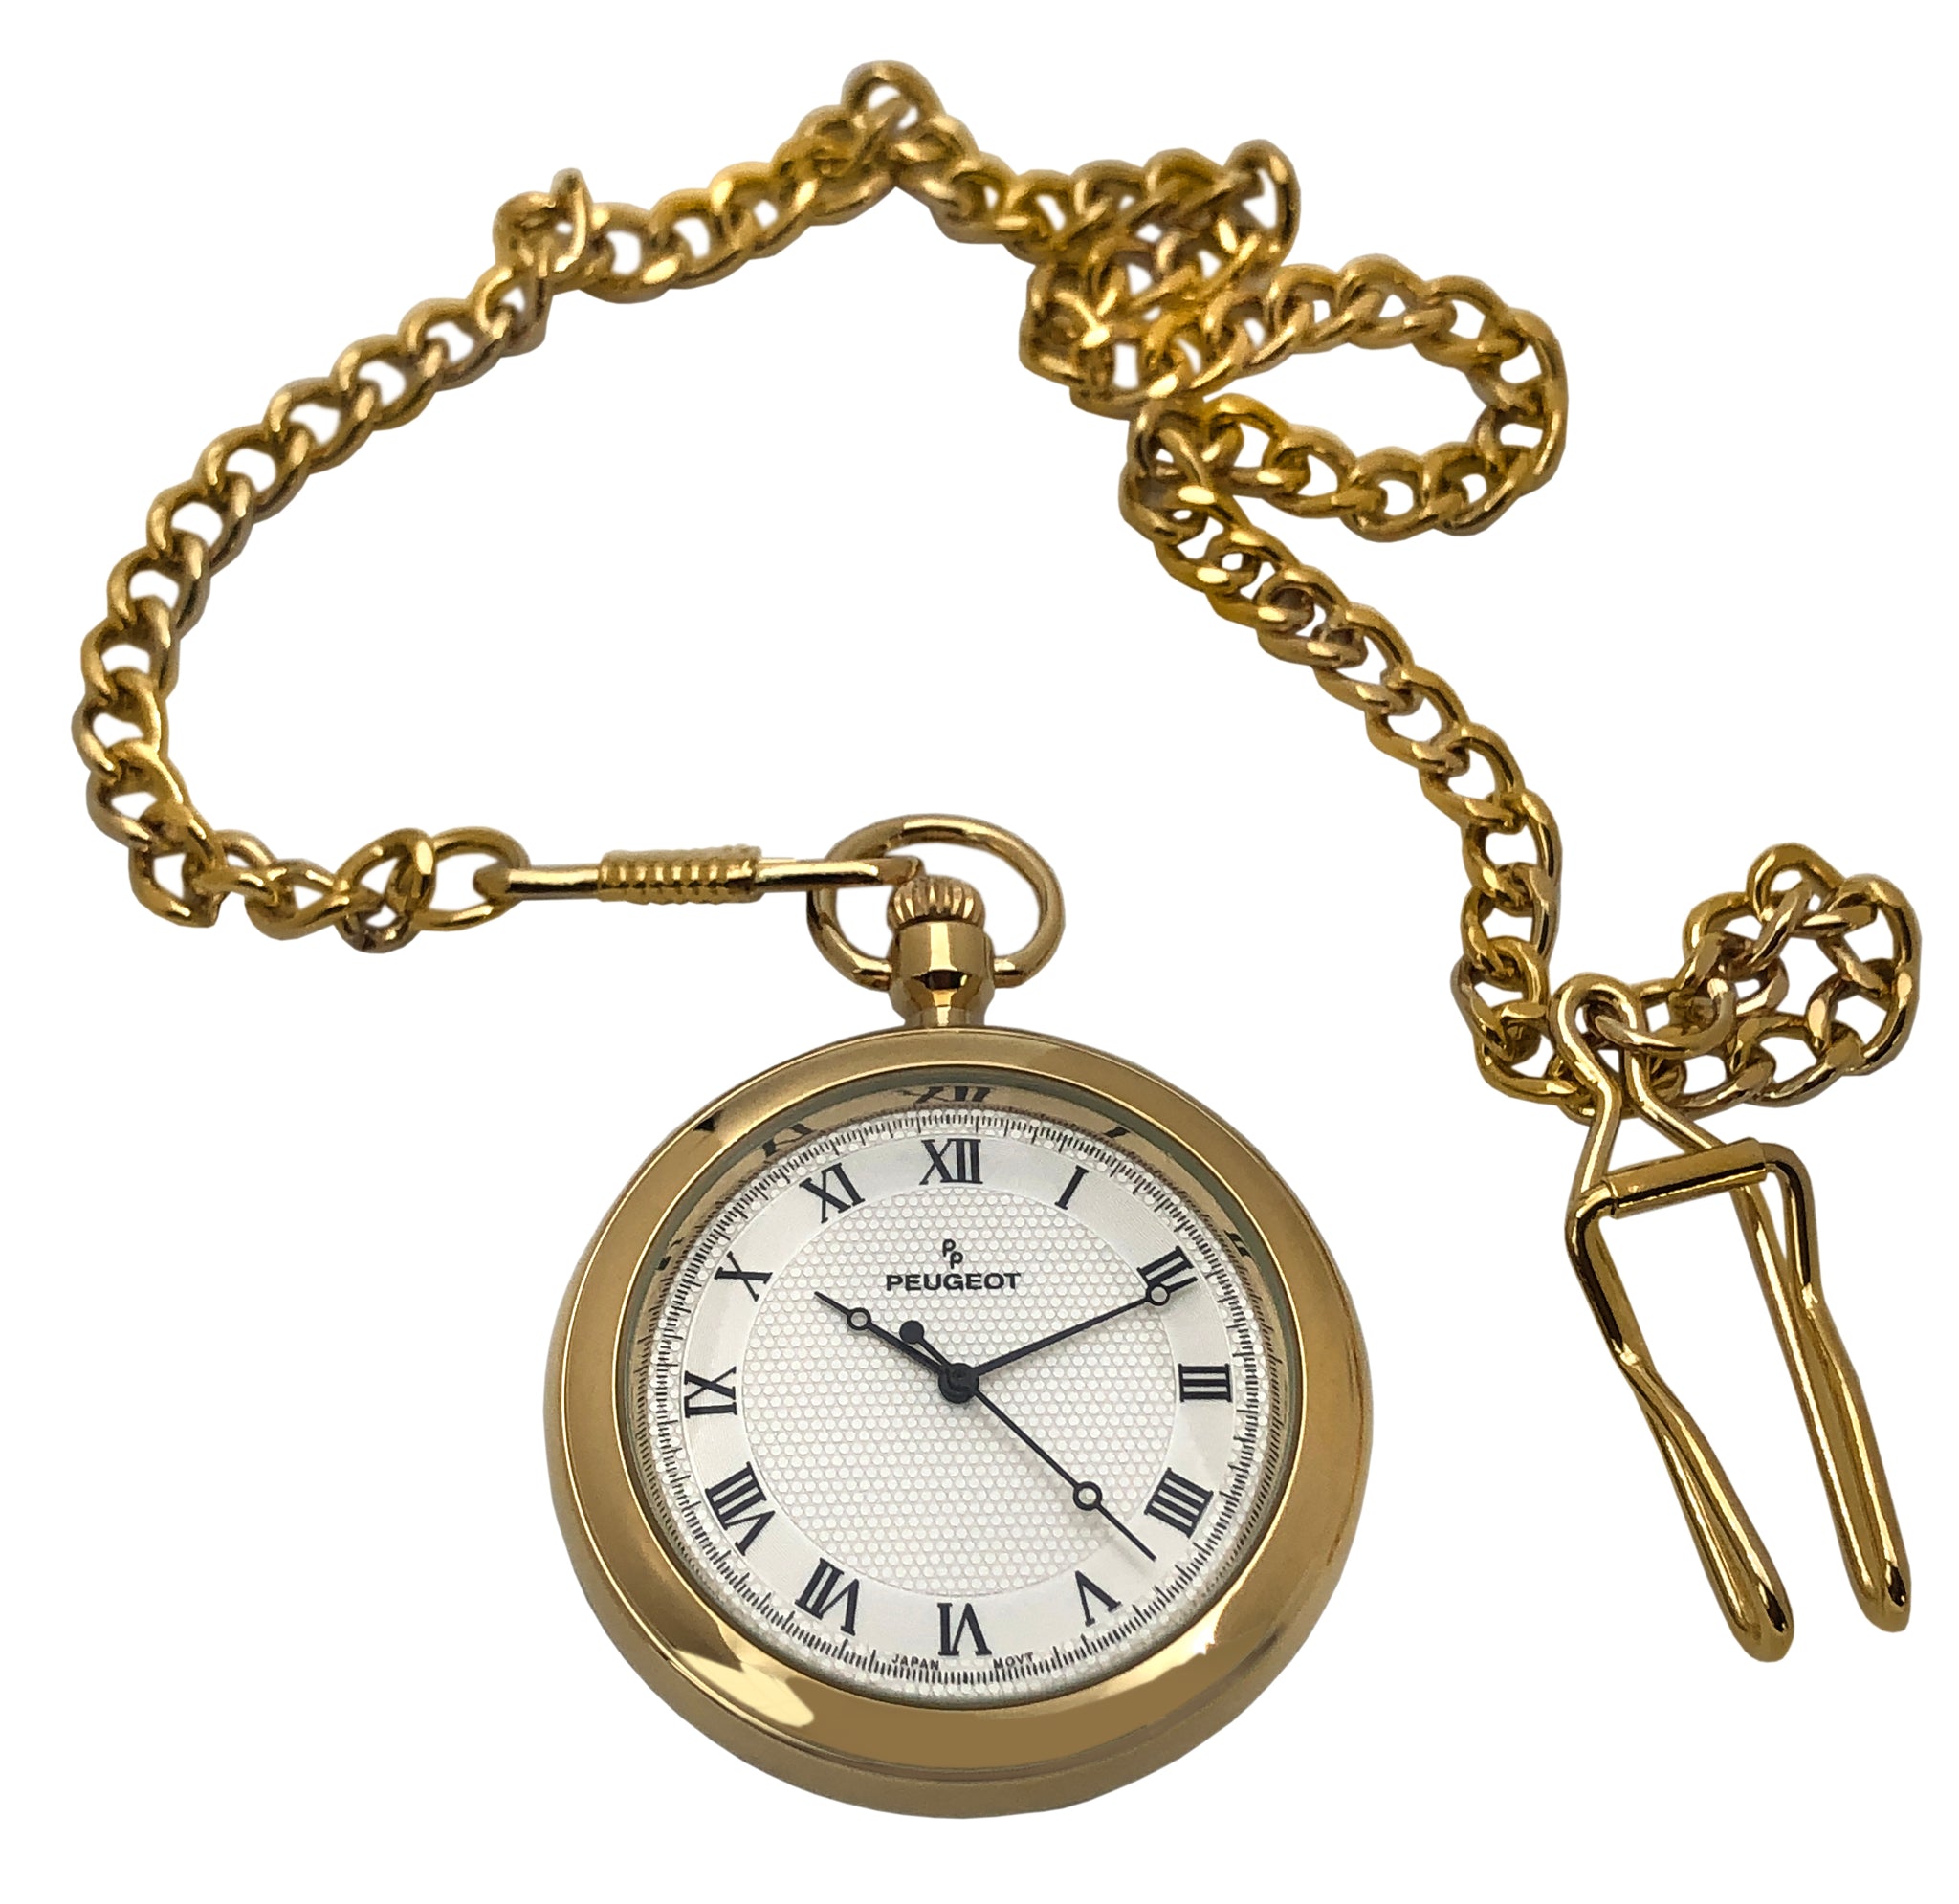 How pocket watches got cool again, from 'watchtok' to Peaky Blinders –  first invented in 1510 and treasured by James Dean, pocket-sized timepieces  on a chain (still) make great conversation starters |